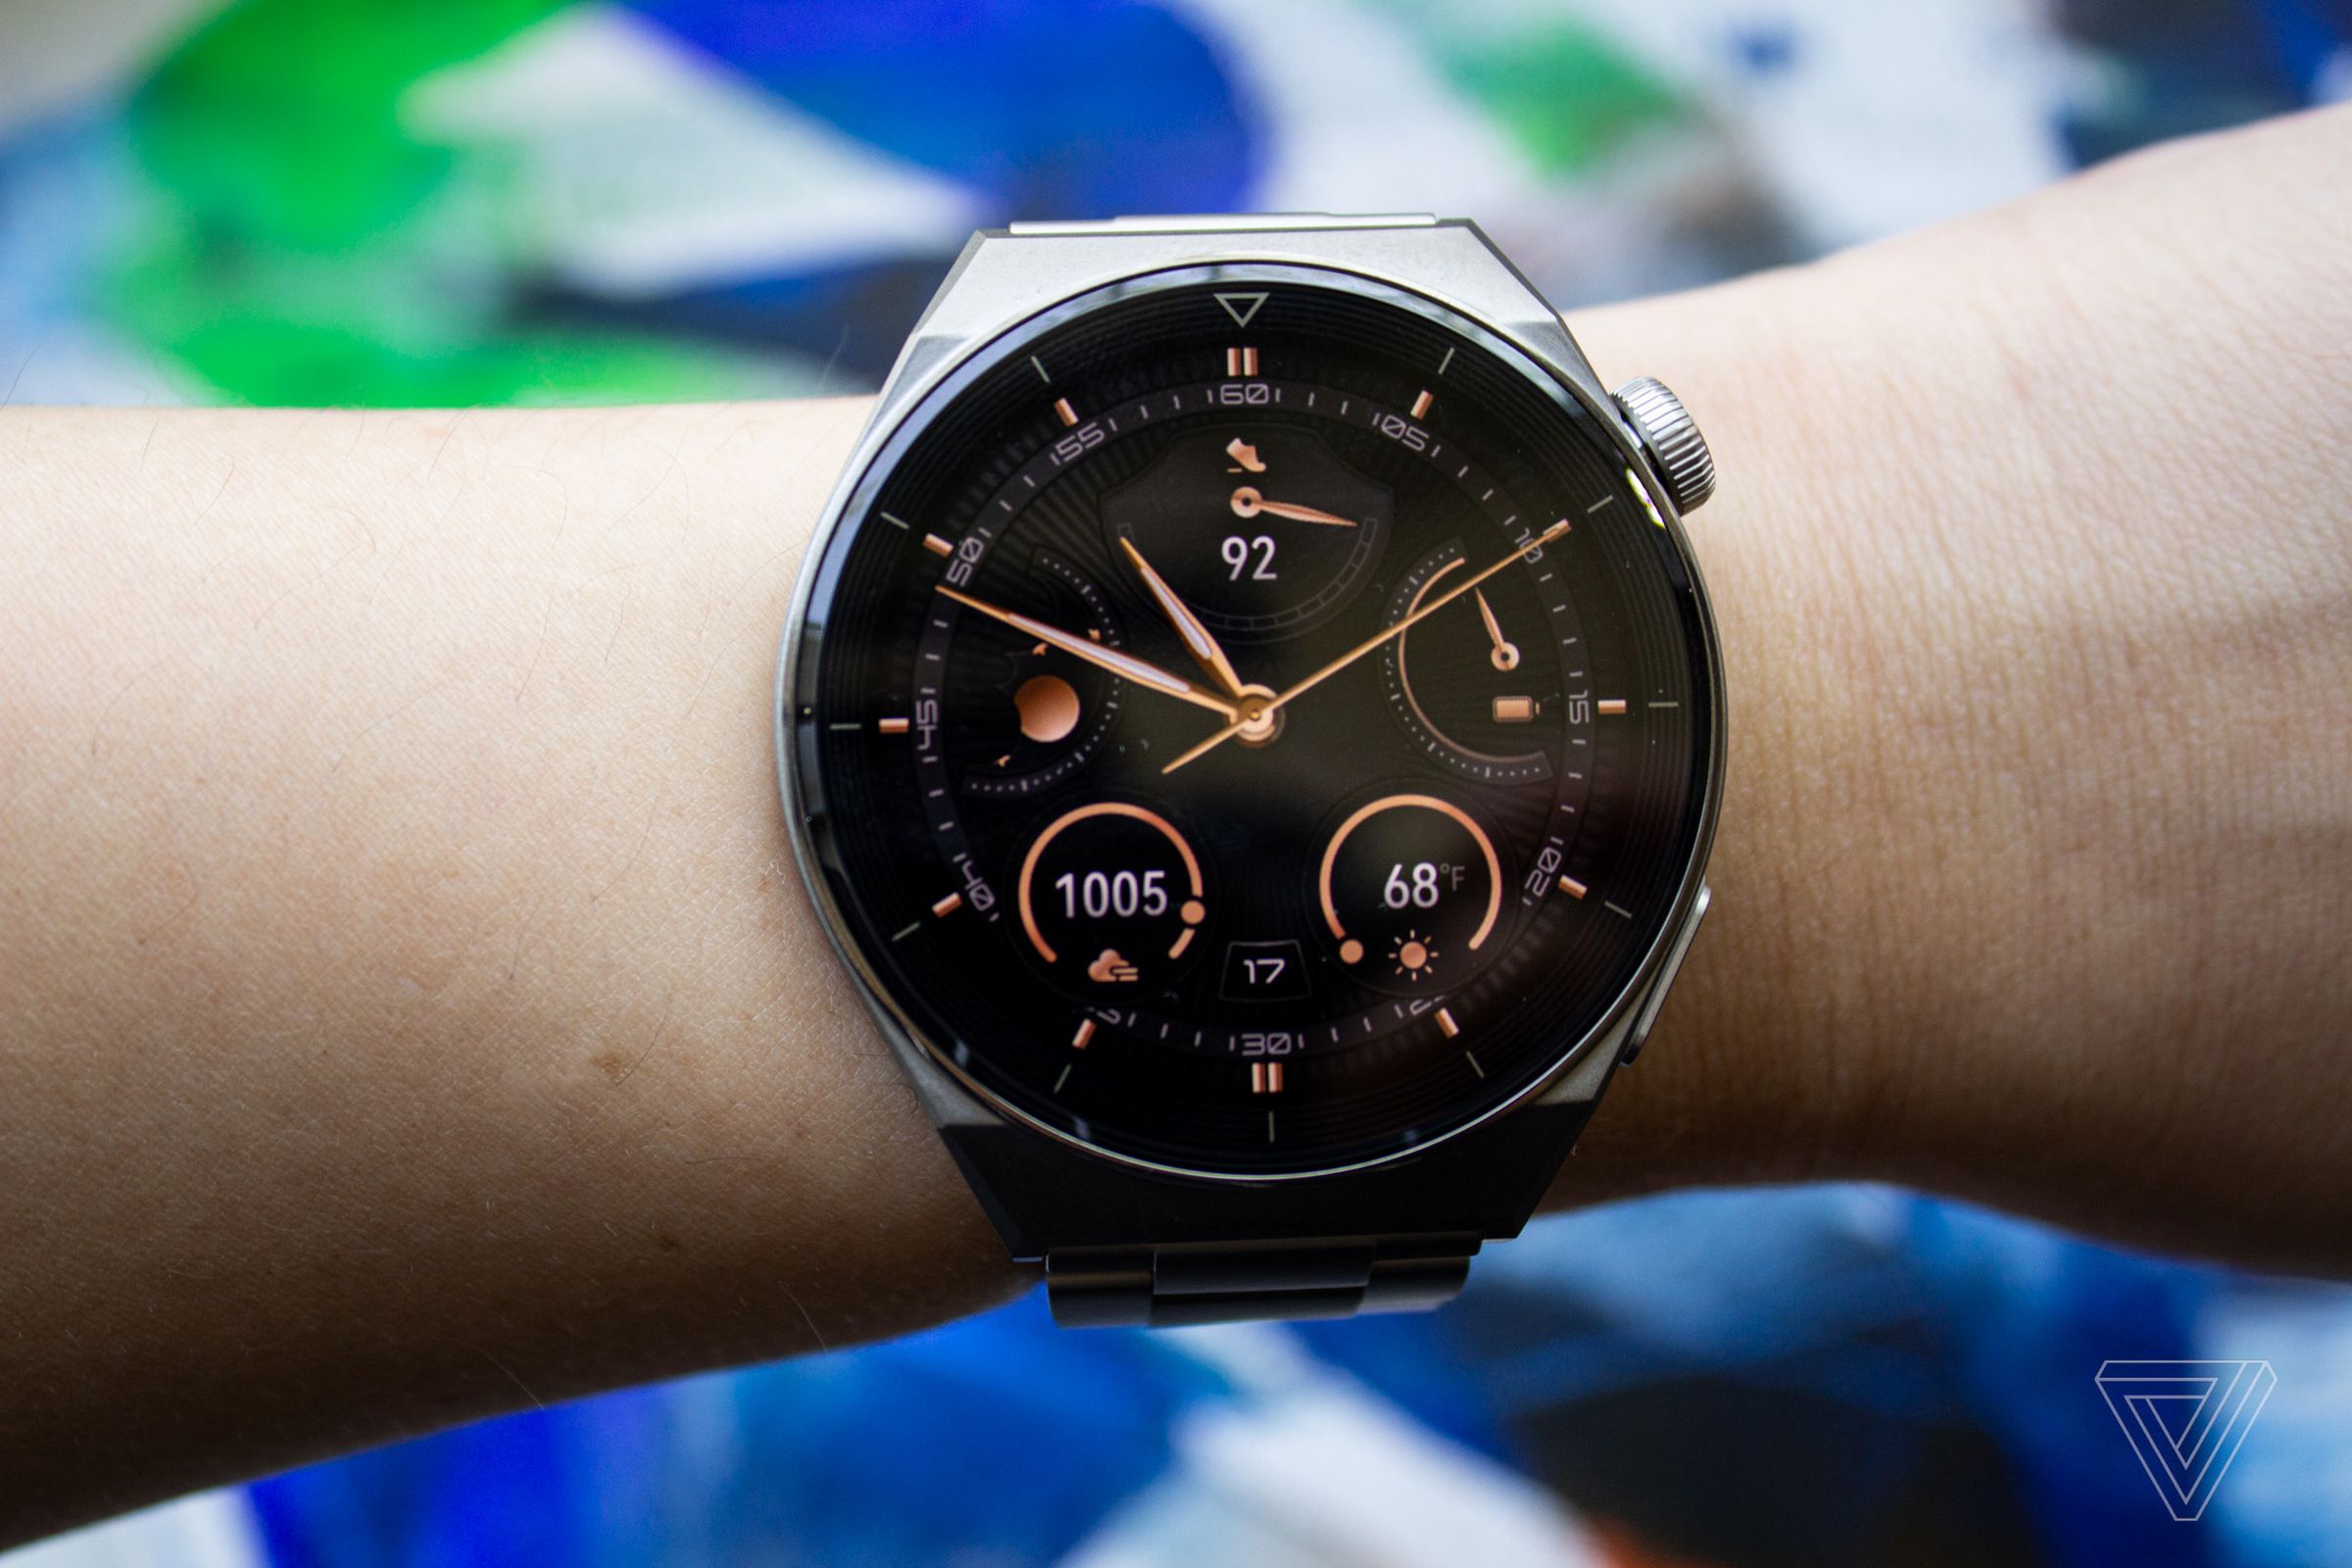 The titanium model has a nearly 47mm case.